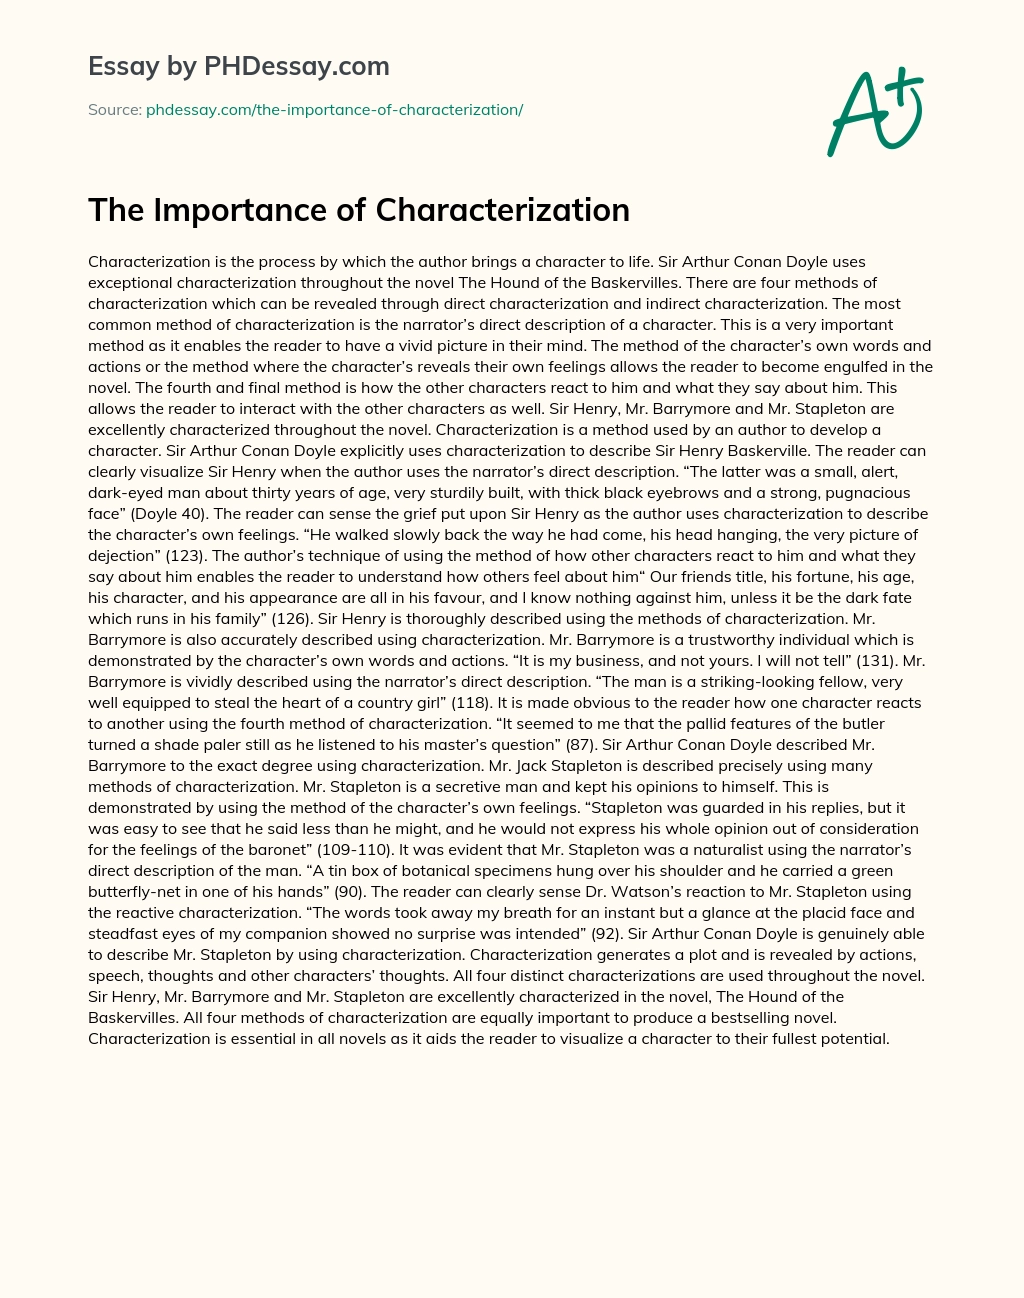 The Importance of Characterization essay